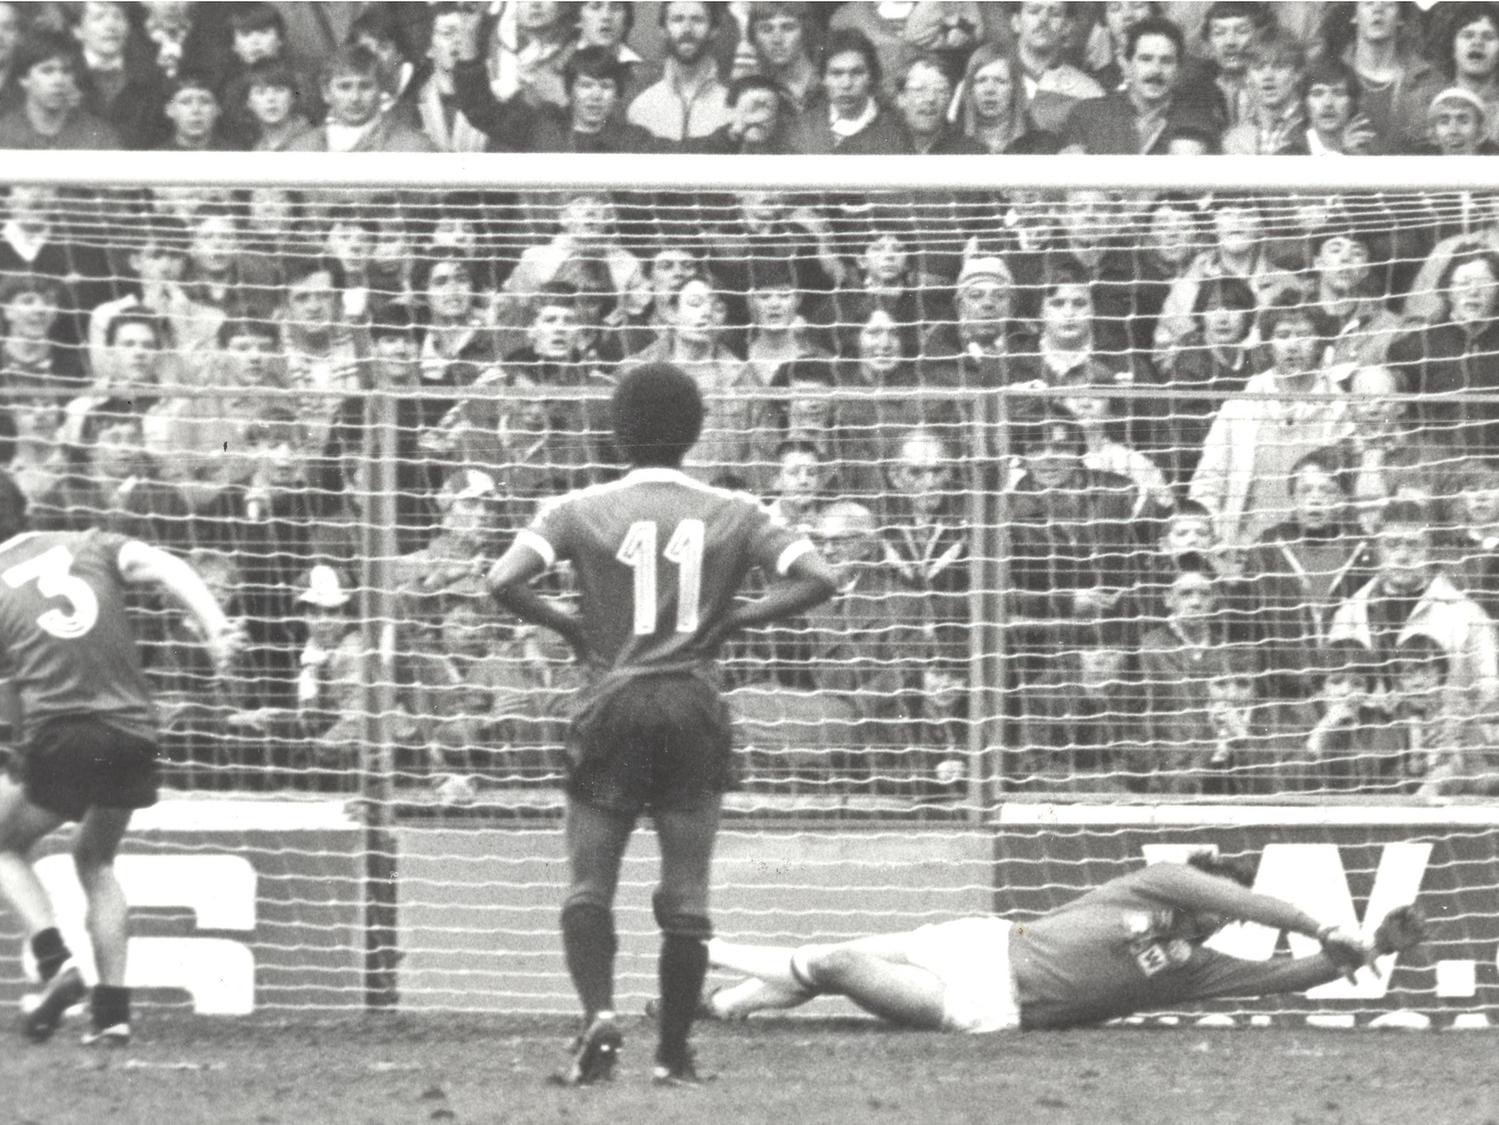 "Frank Gray with a penalty winner in last minute. #hooked #lufc" - Andrew Booth @AndyBooth779